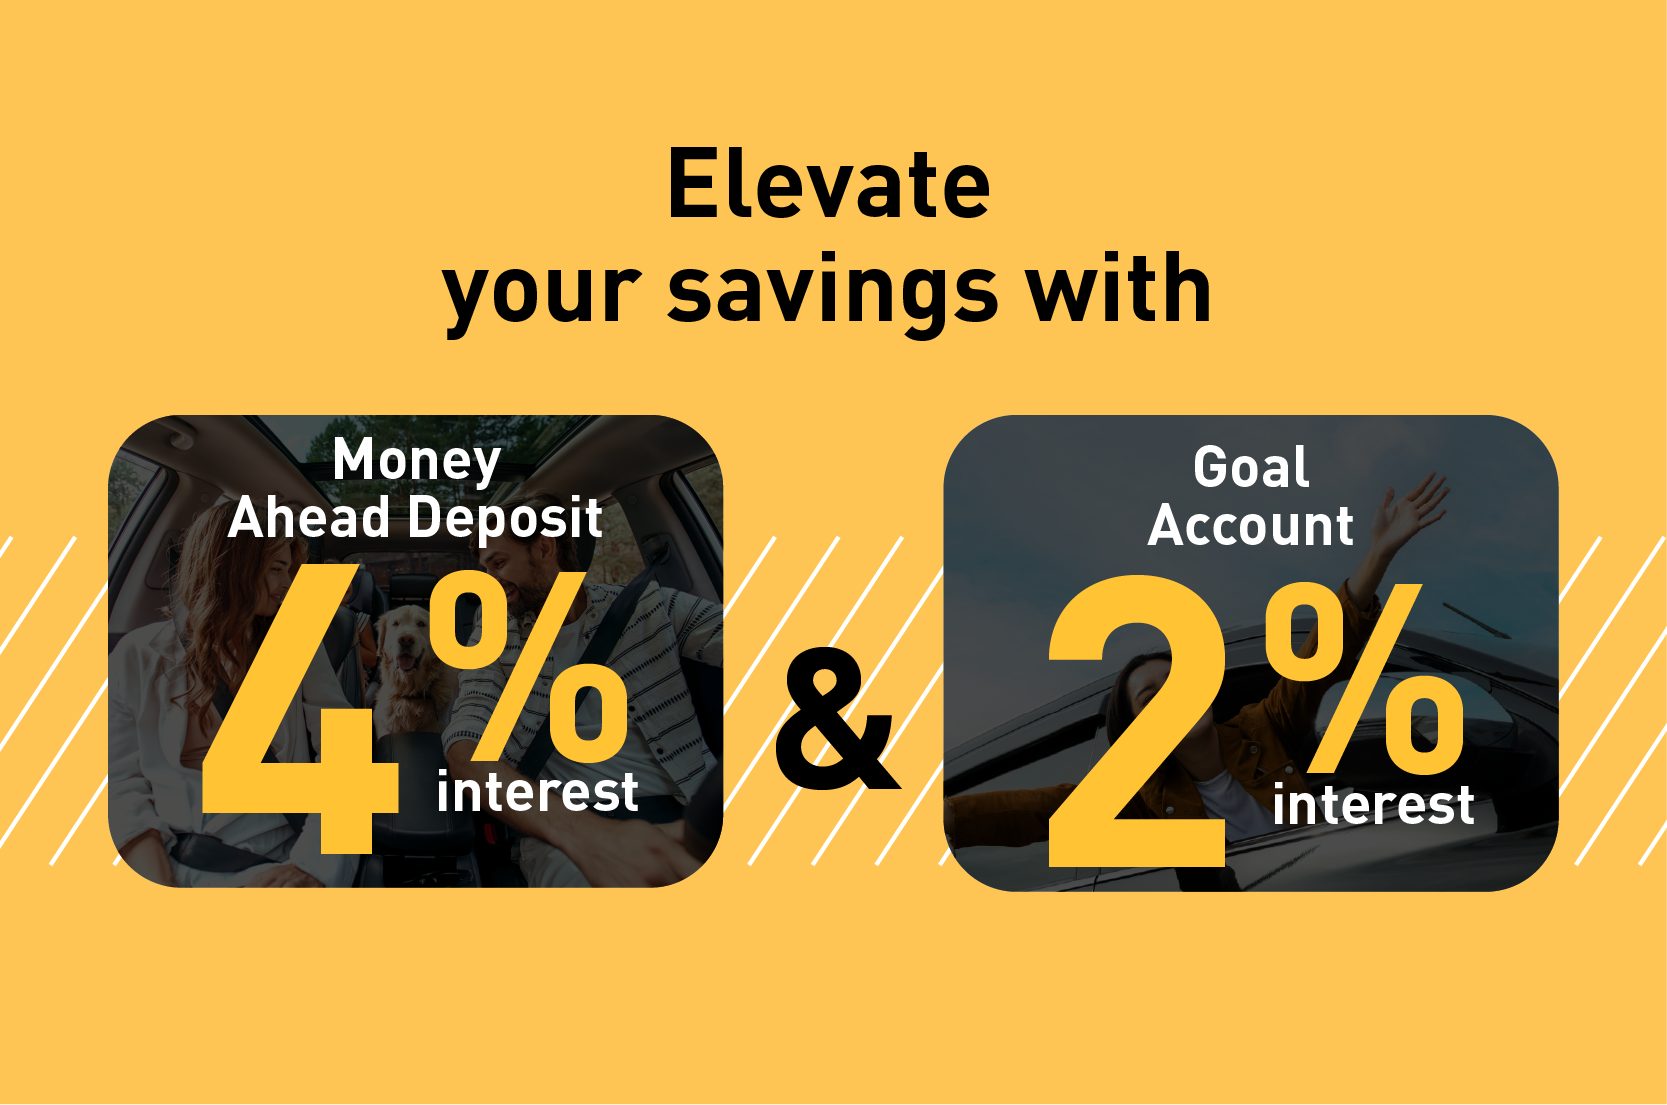 Achieve Your Financial Goals with Liv’s Goal Account